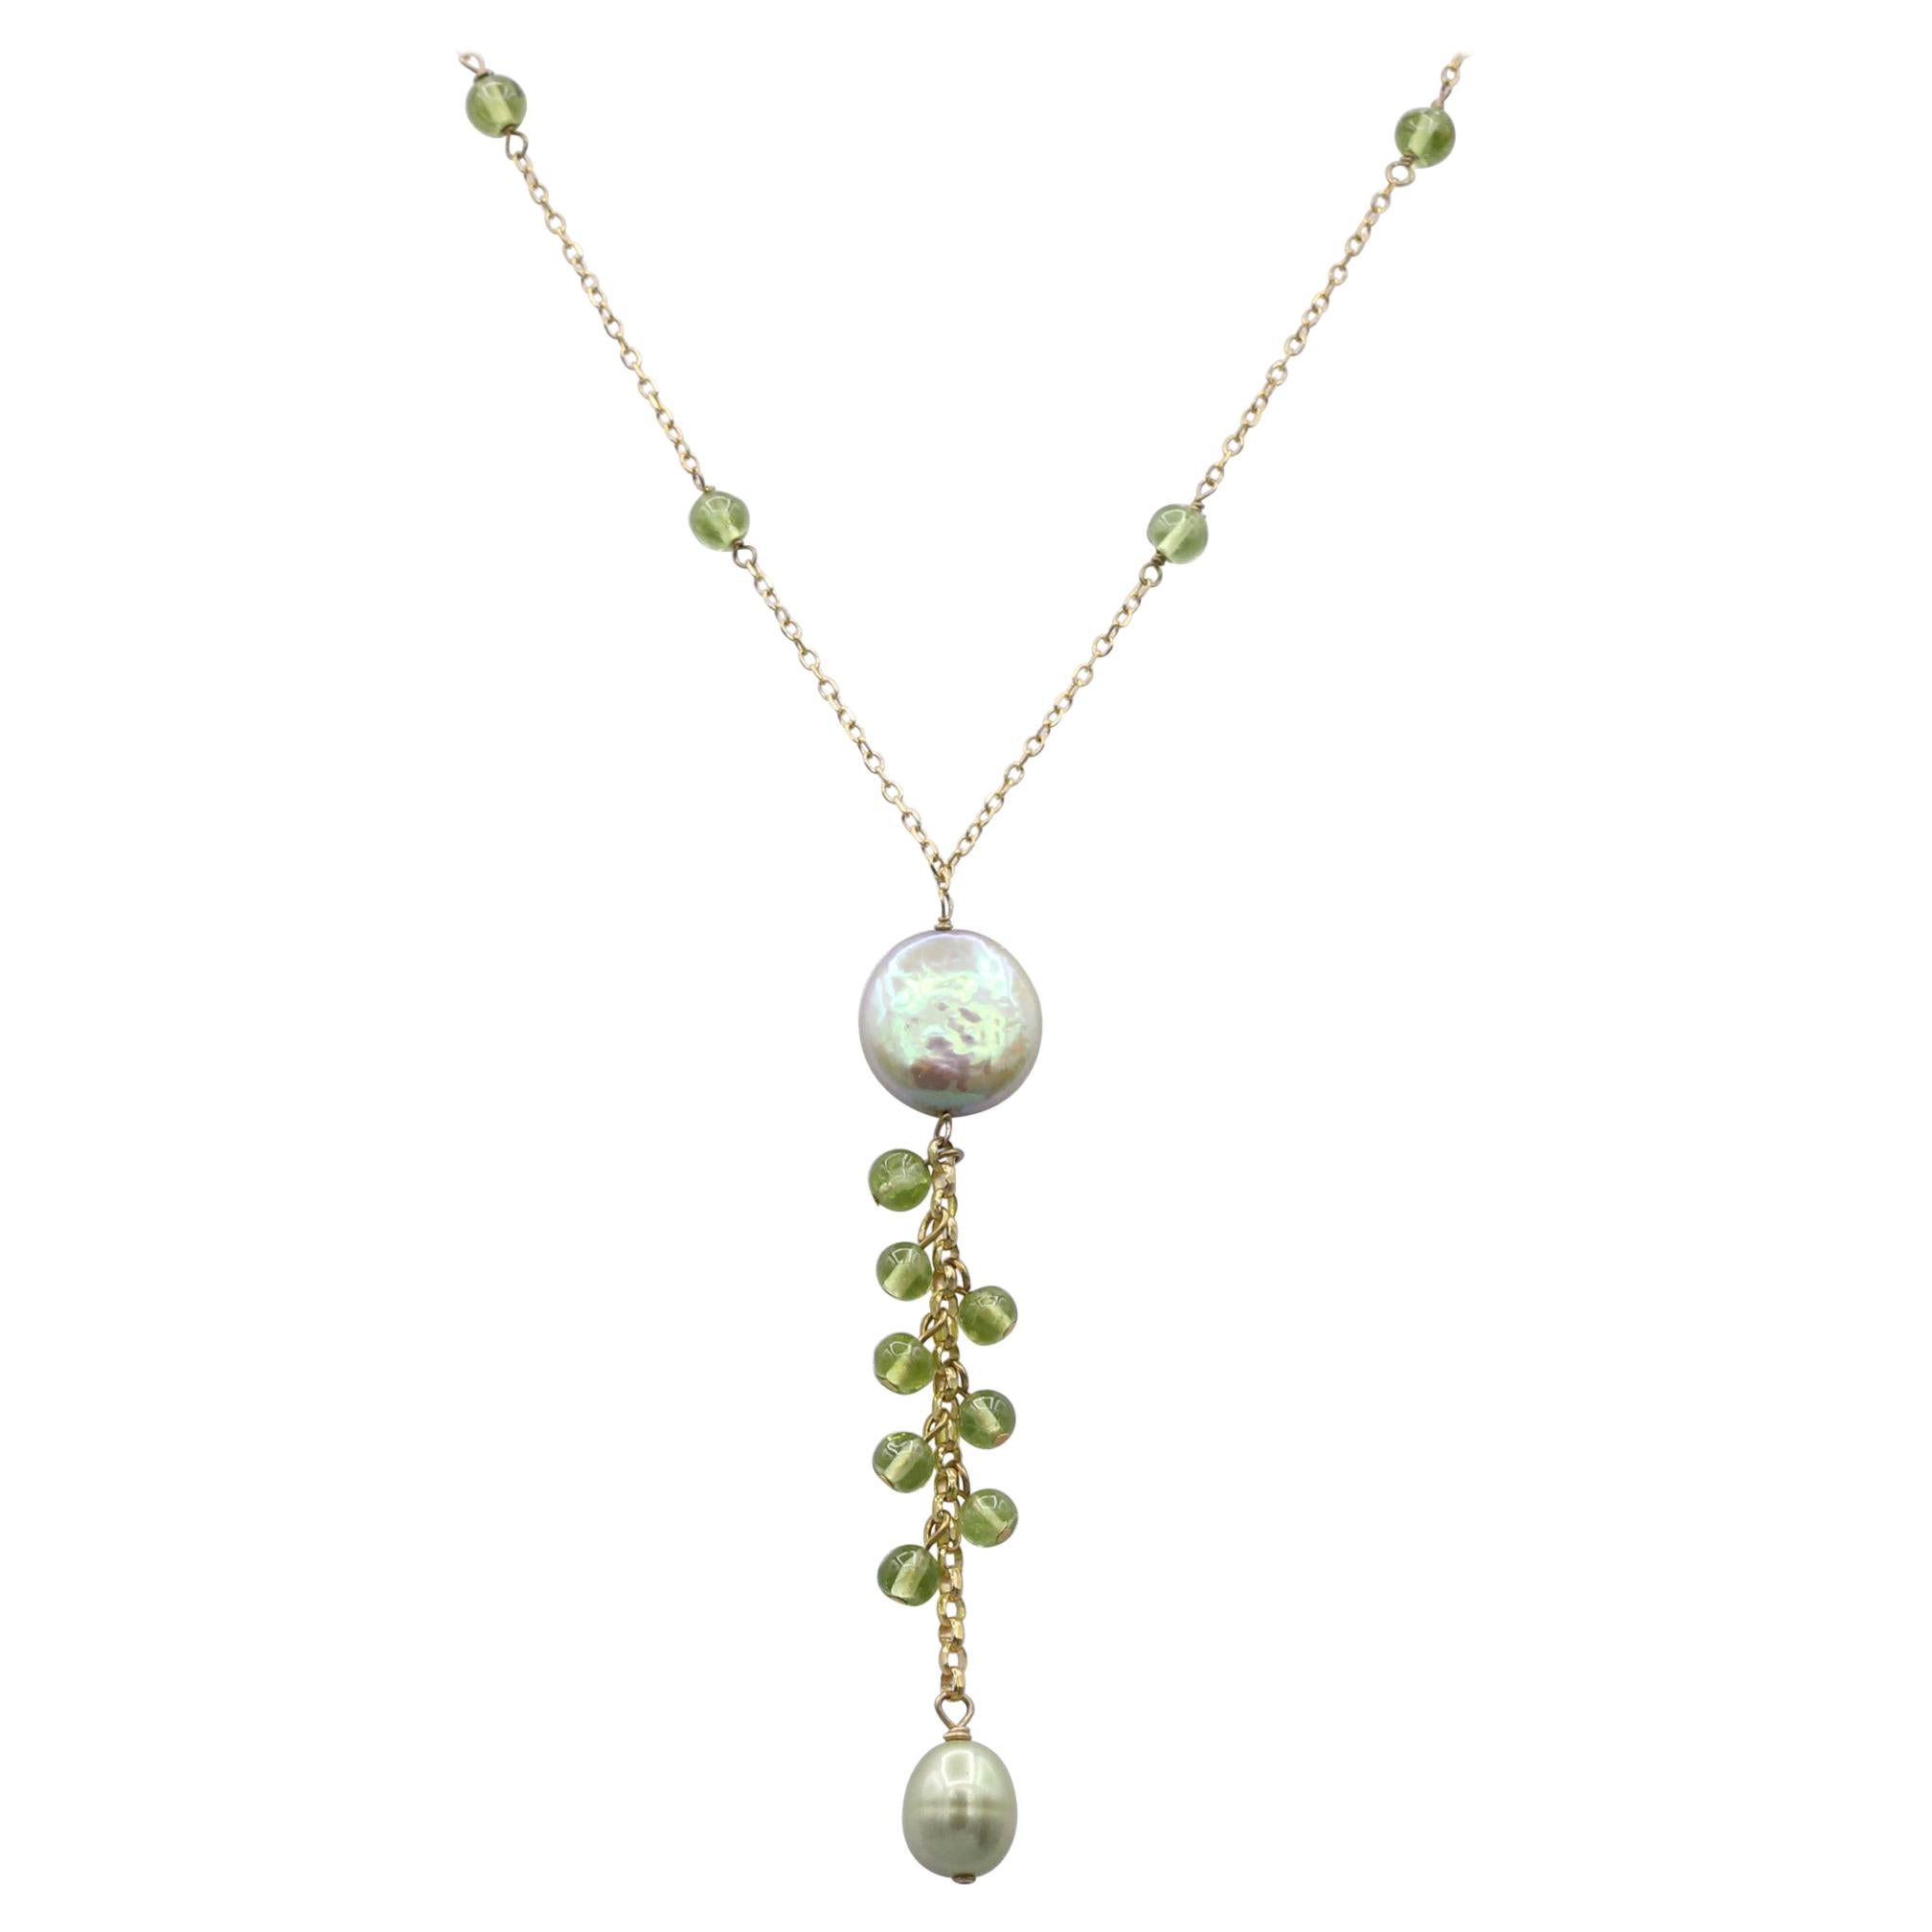 Dangling Peridot Necklace 14 Karat Yellow Gold Bead Wire Green Stones For Sale